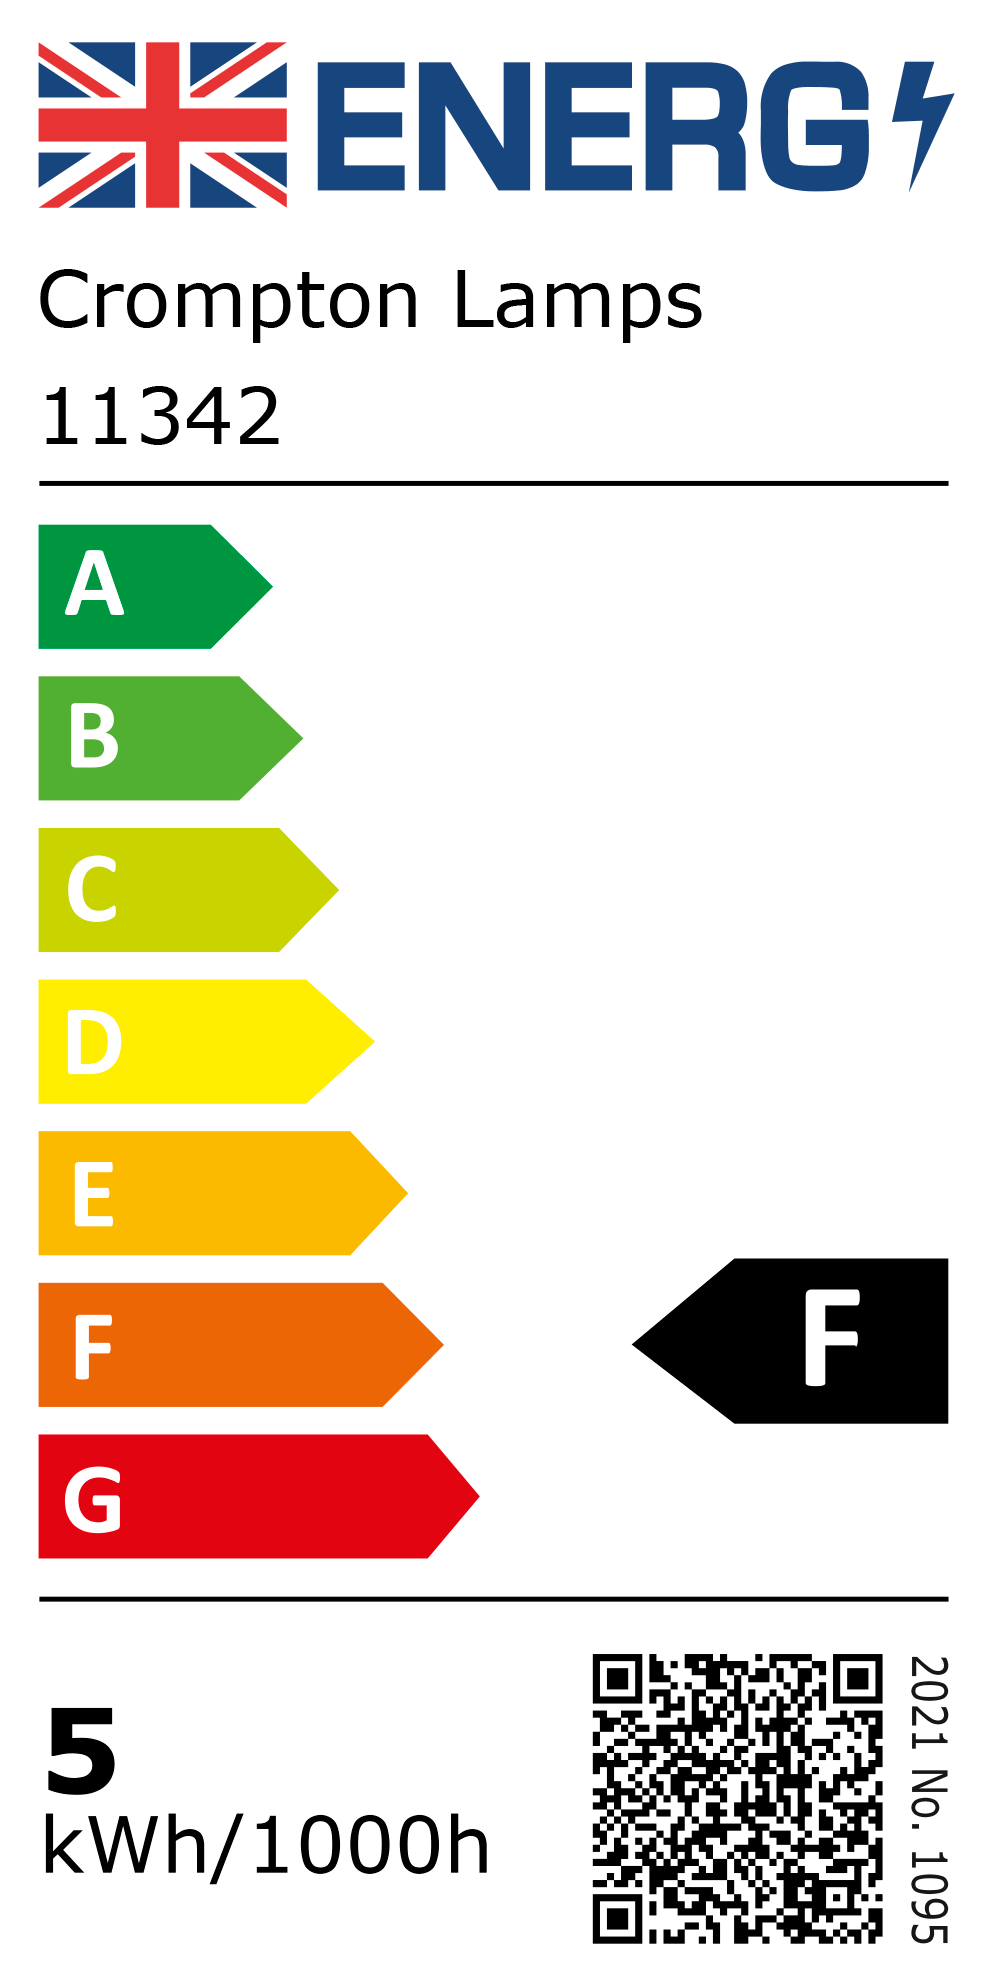 New 2021 Energy Rating Label: Stock Code 11342